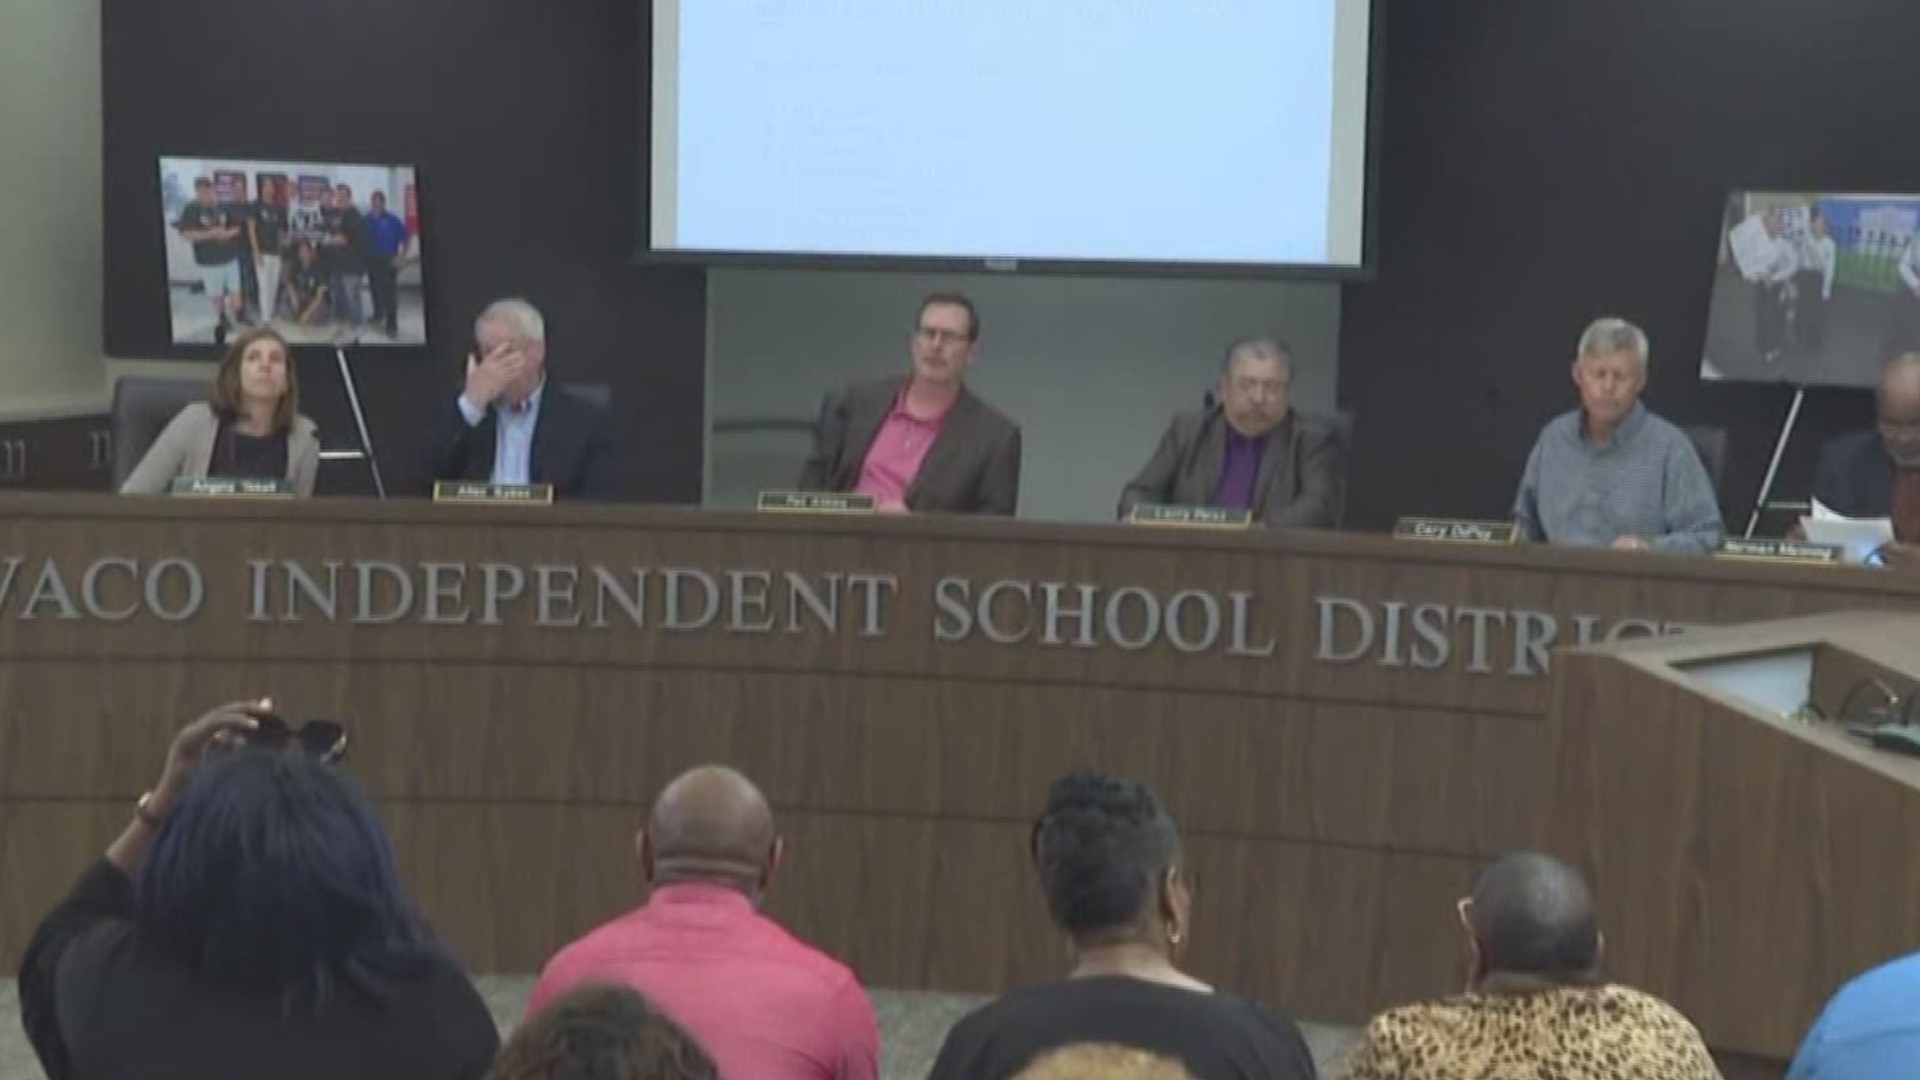 Waco Independent School District is continuing its search for a superintendent to replace Dr. Marcus Nelson. District representatives hope to have the position filled by August.